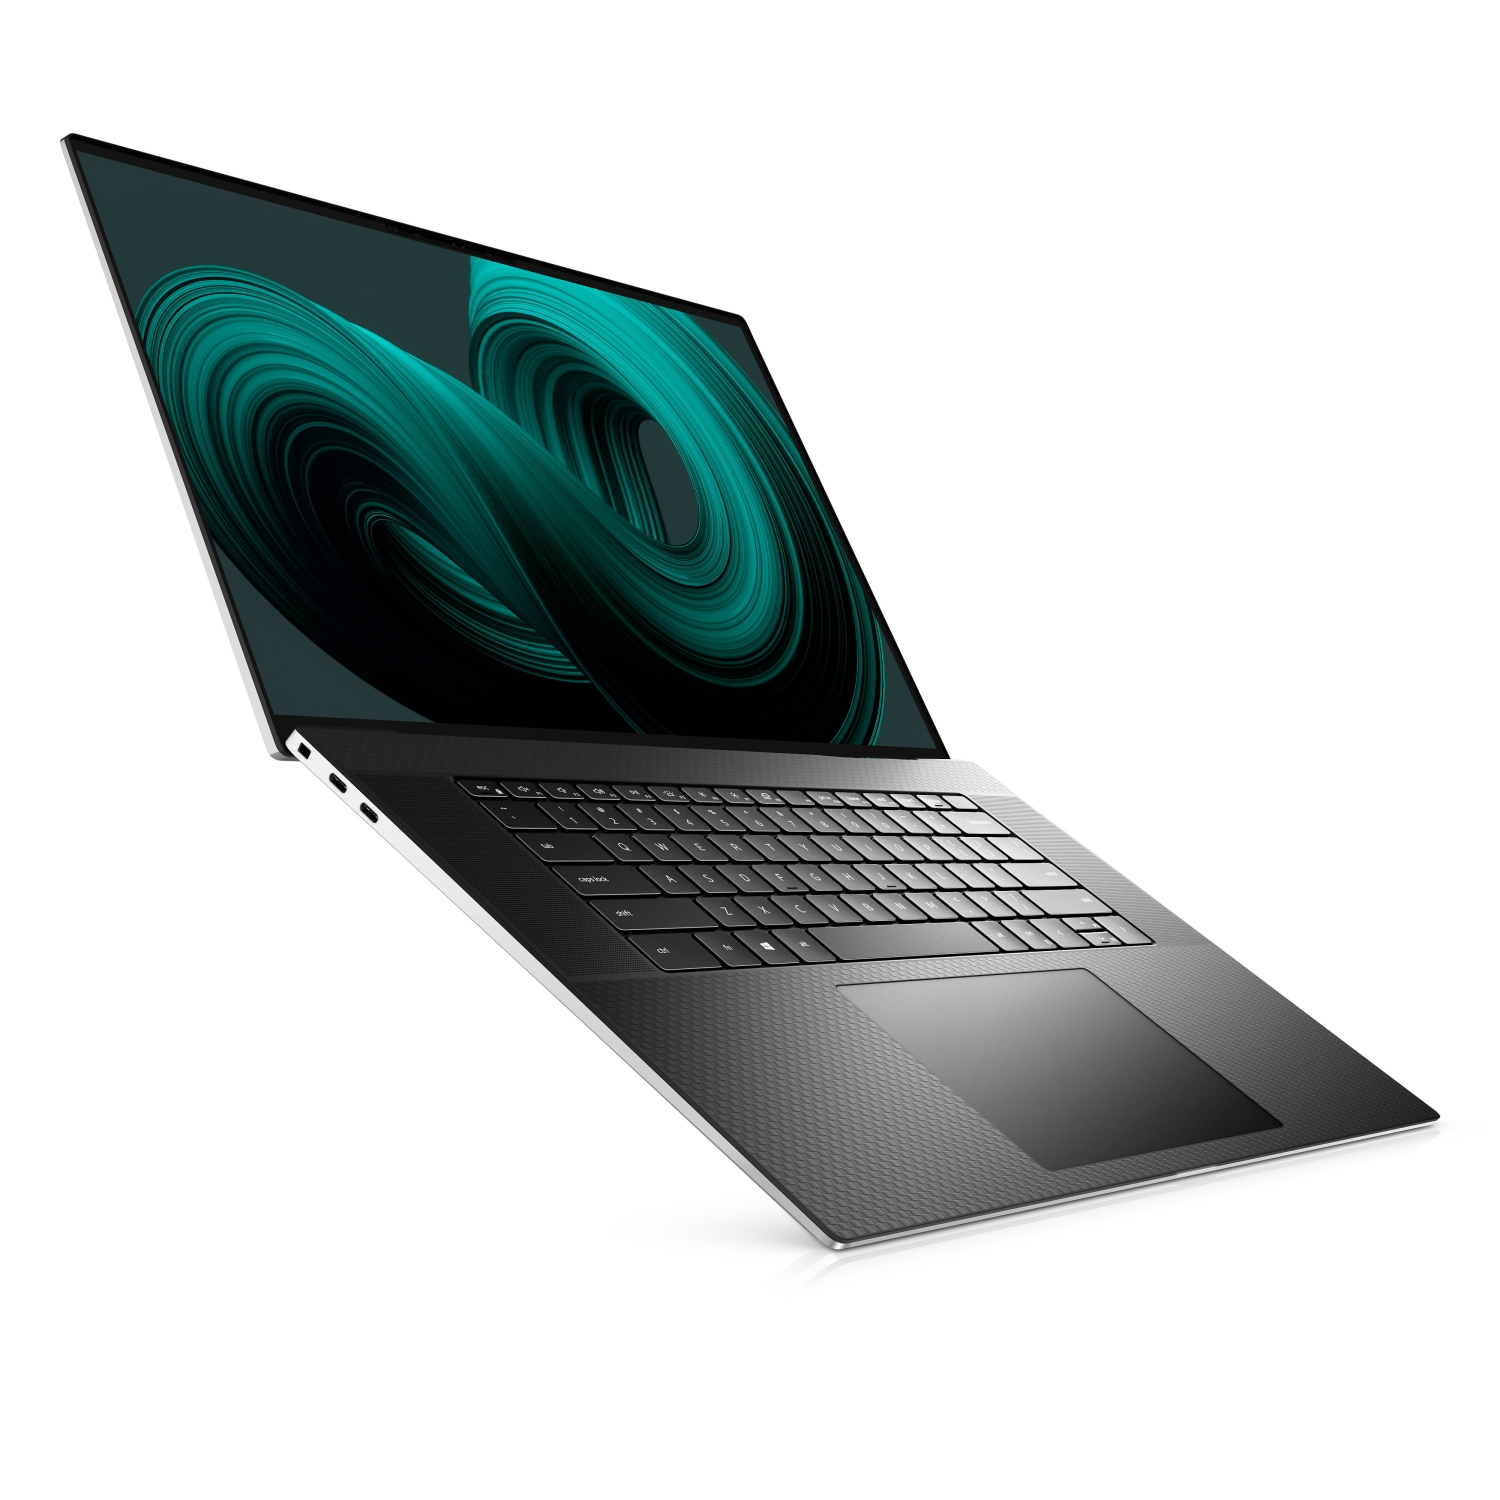 Refurbished (Excellent) - Dell XPS 17 9710 Laptop (2021), 17" 4K Touch, Core i7 - 512GB SSD - 16GB RAM - RTX 3050, 8 Cores @ 4.6 GHz - 11th Gen CPU Certified Refurbished